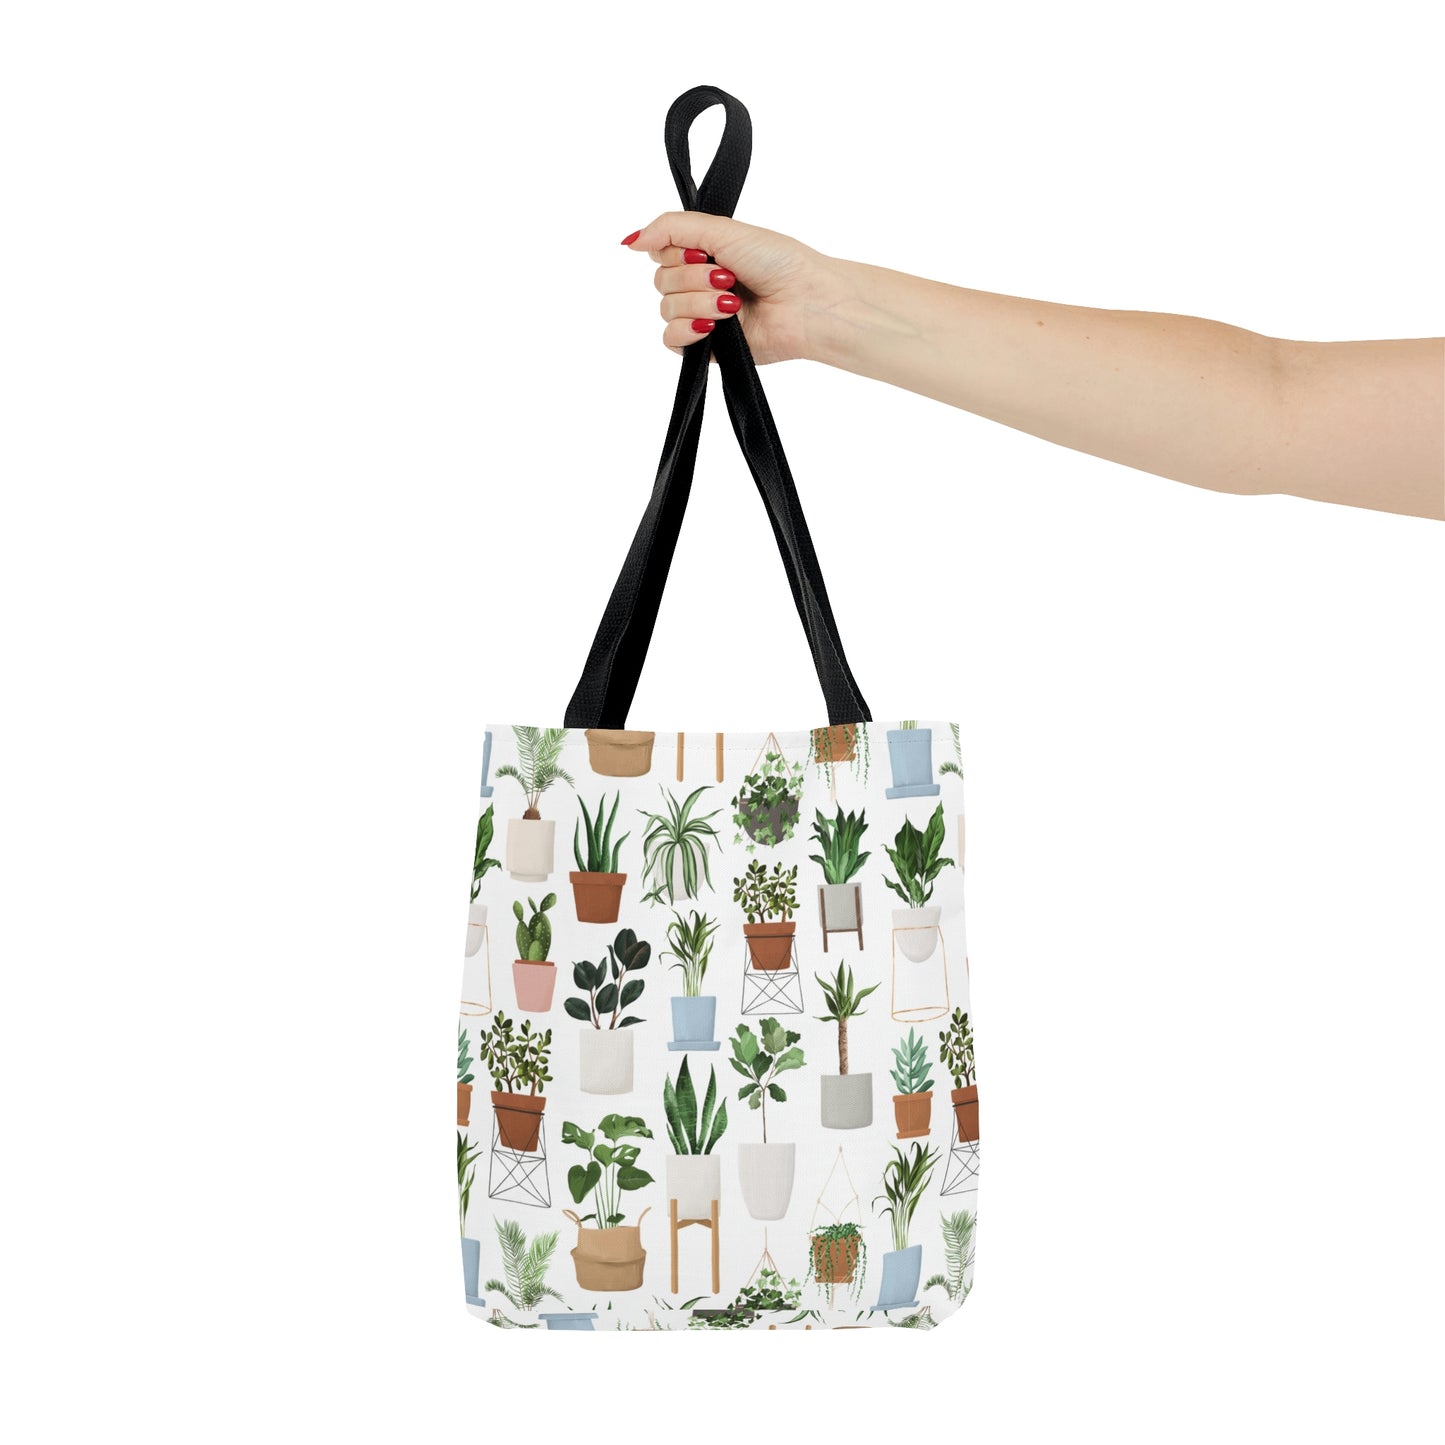 House plants Tote Bag for plant lover, plant mama or plant lady. Cute plant christmas gift for mother in law or girlfriend